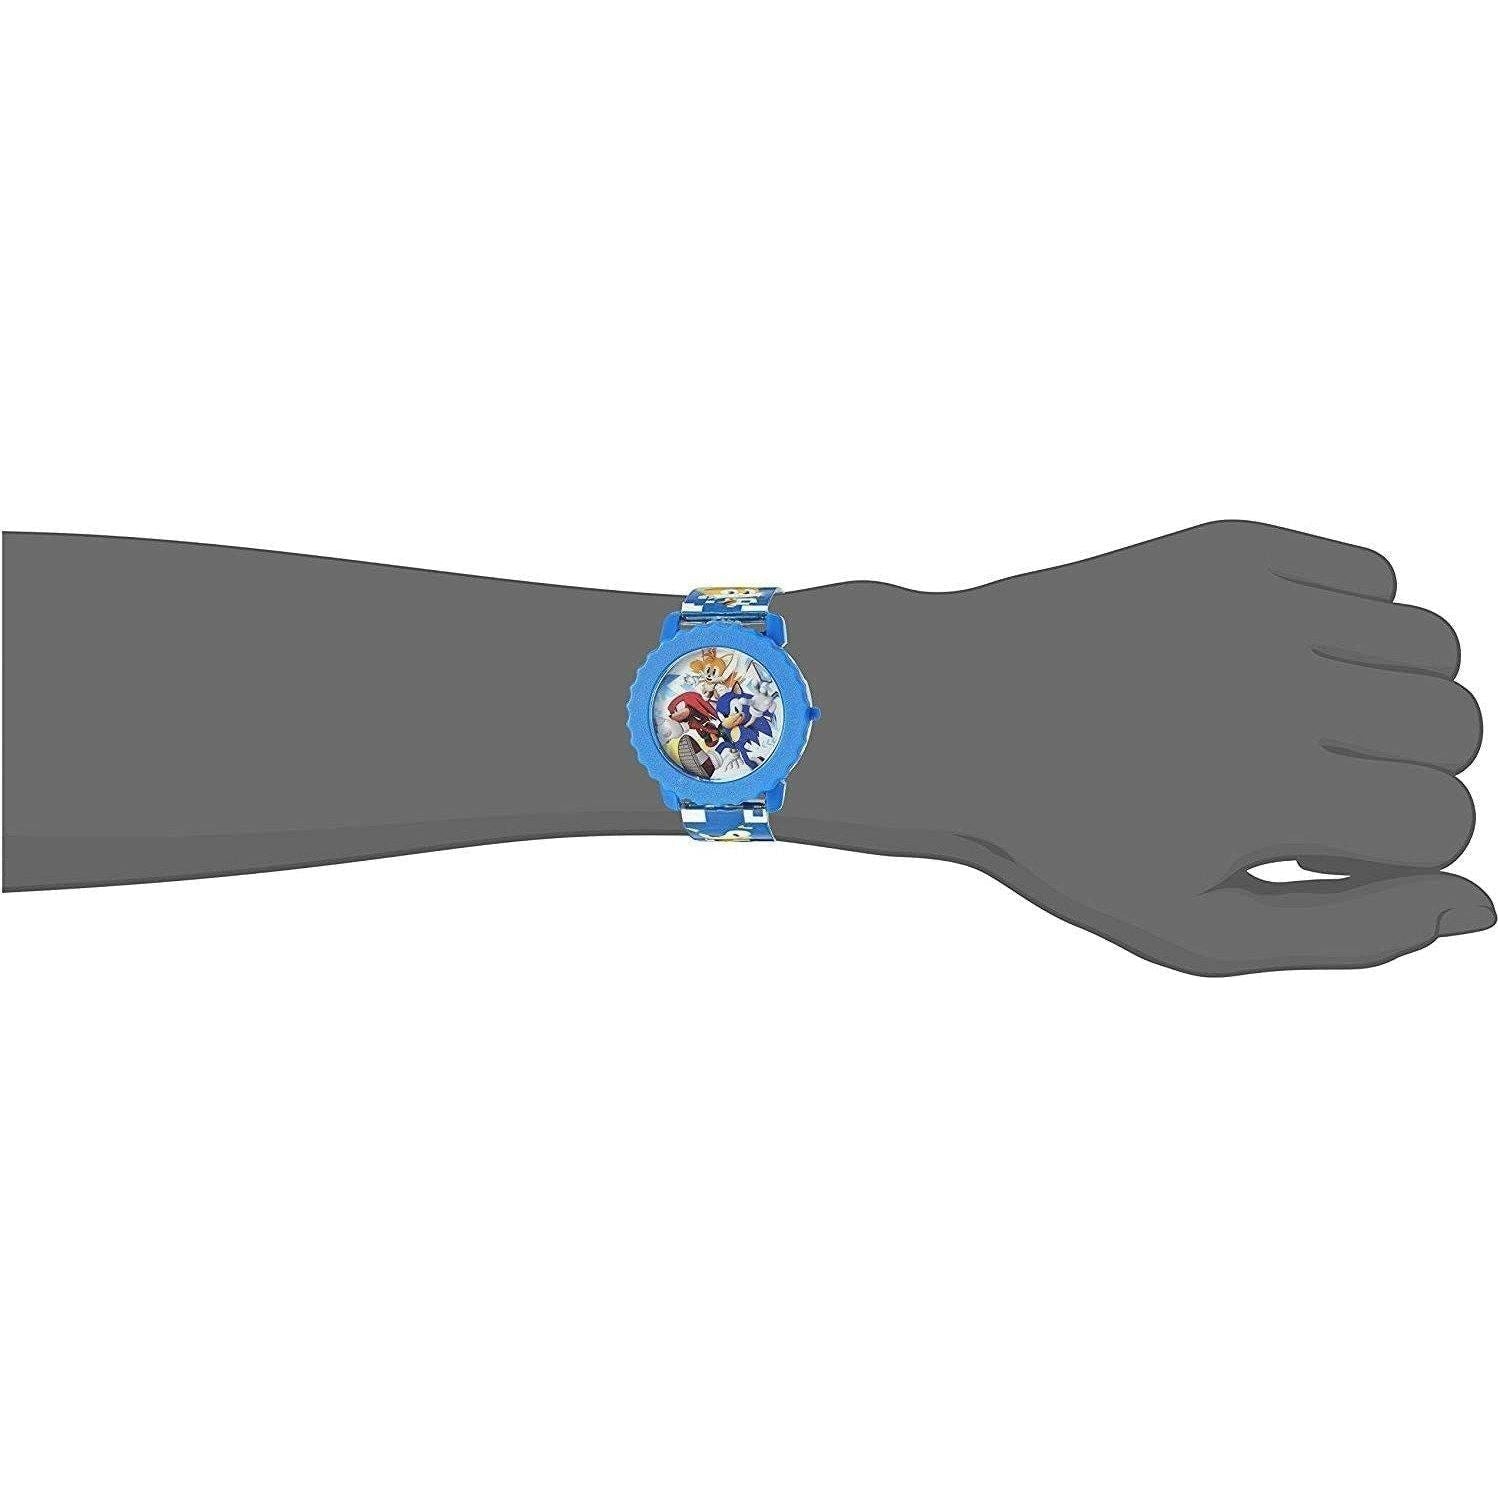 Sonic the Hedgehog Kid's Quartz Watch with Plastic Strap, Blue, (Model: SNC4028) - BumbleToys - 5-7 Years, Boys, OXE, Pre-Order, Sonic, Wrist Watches